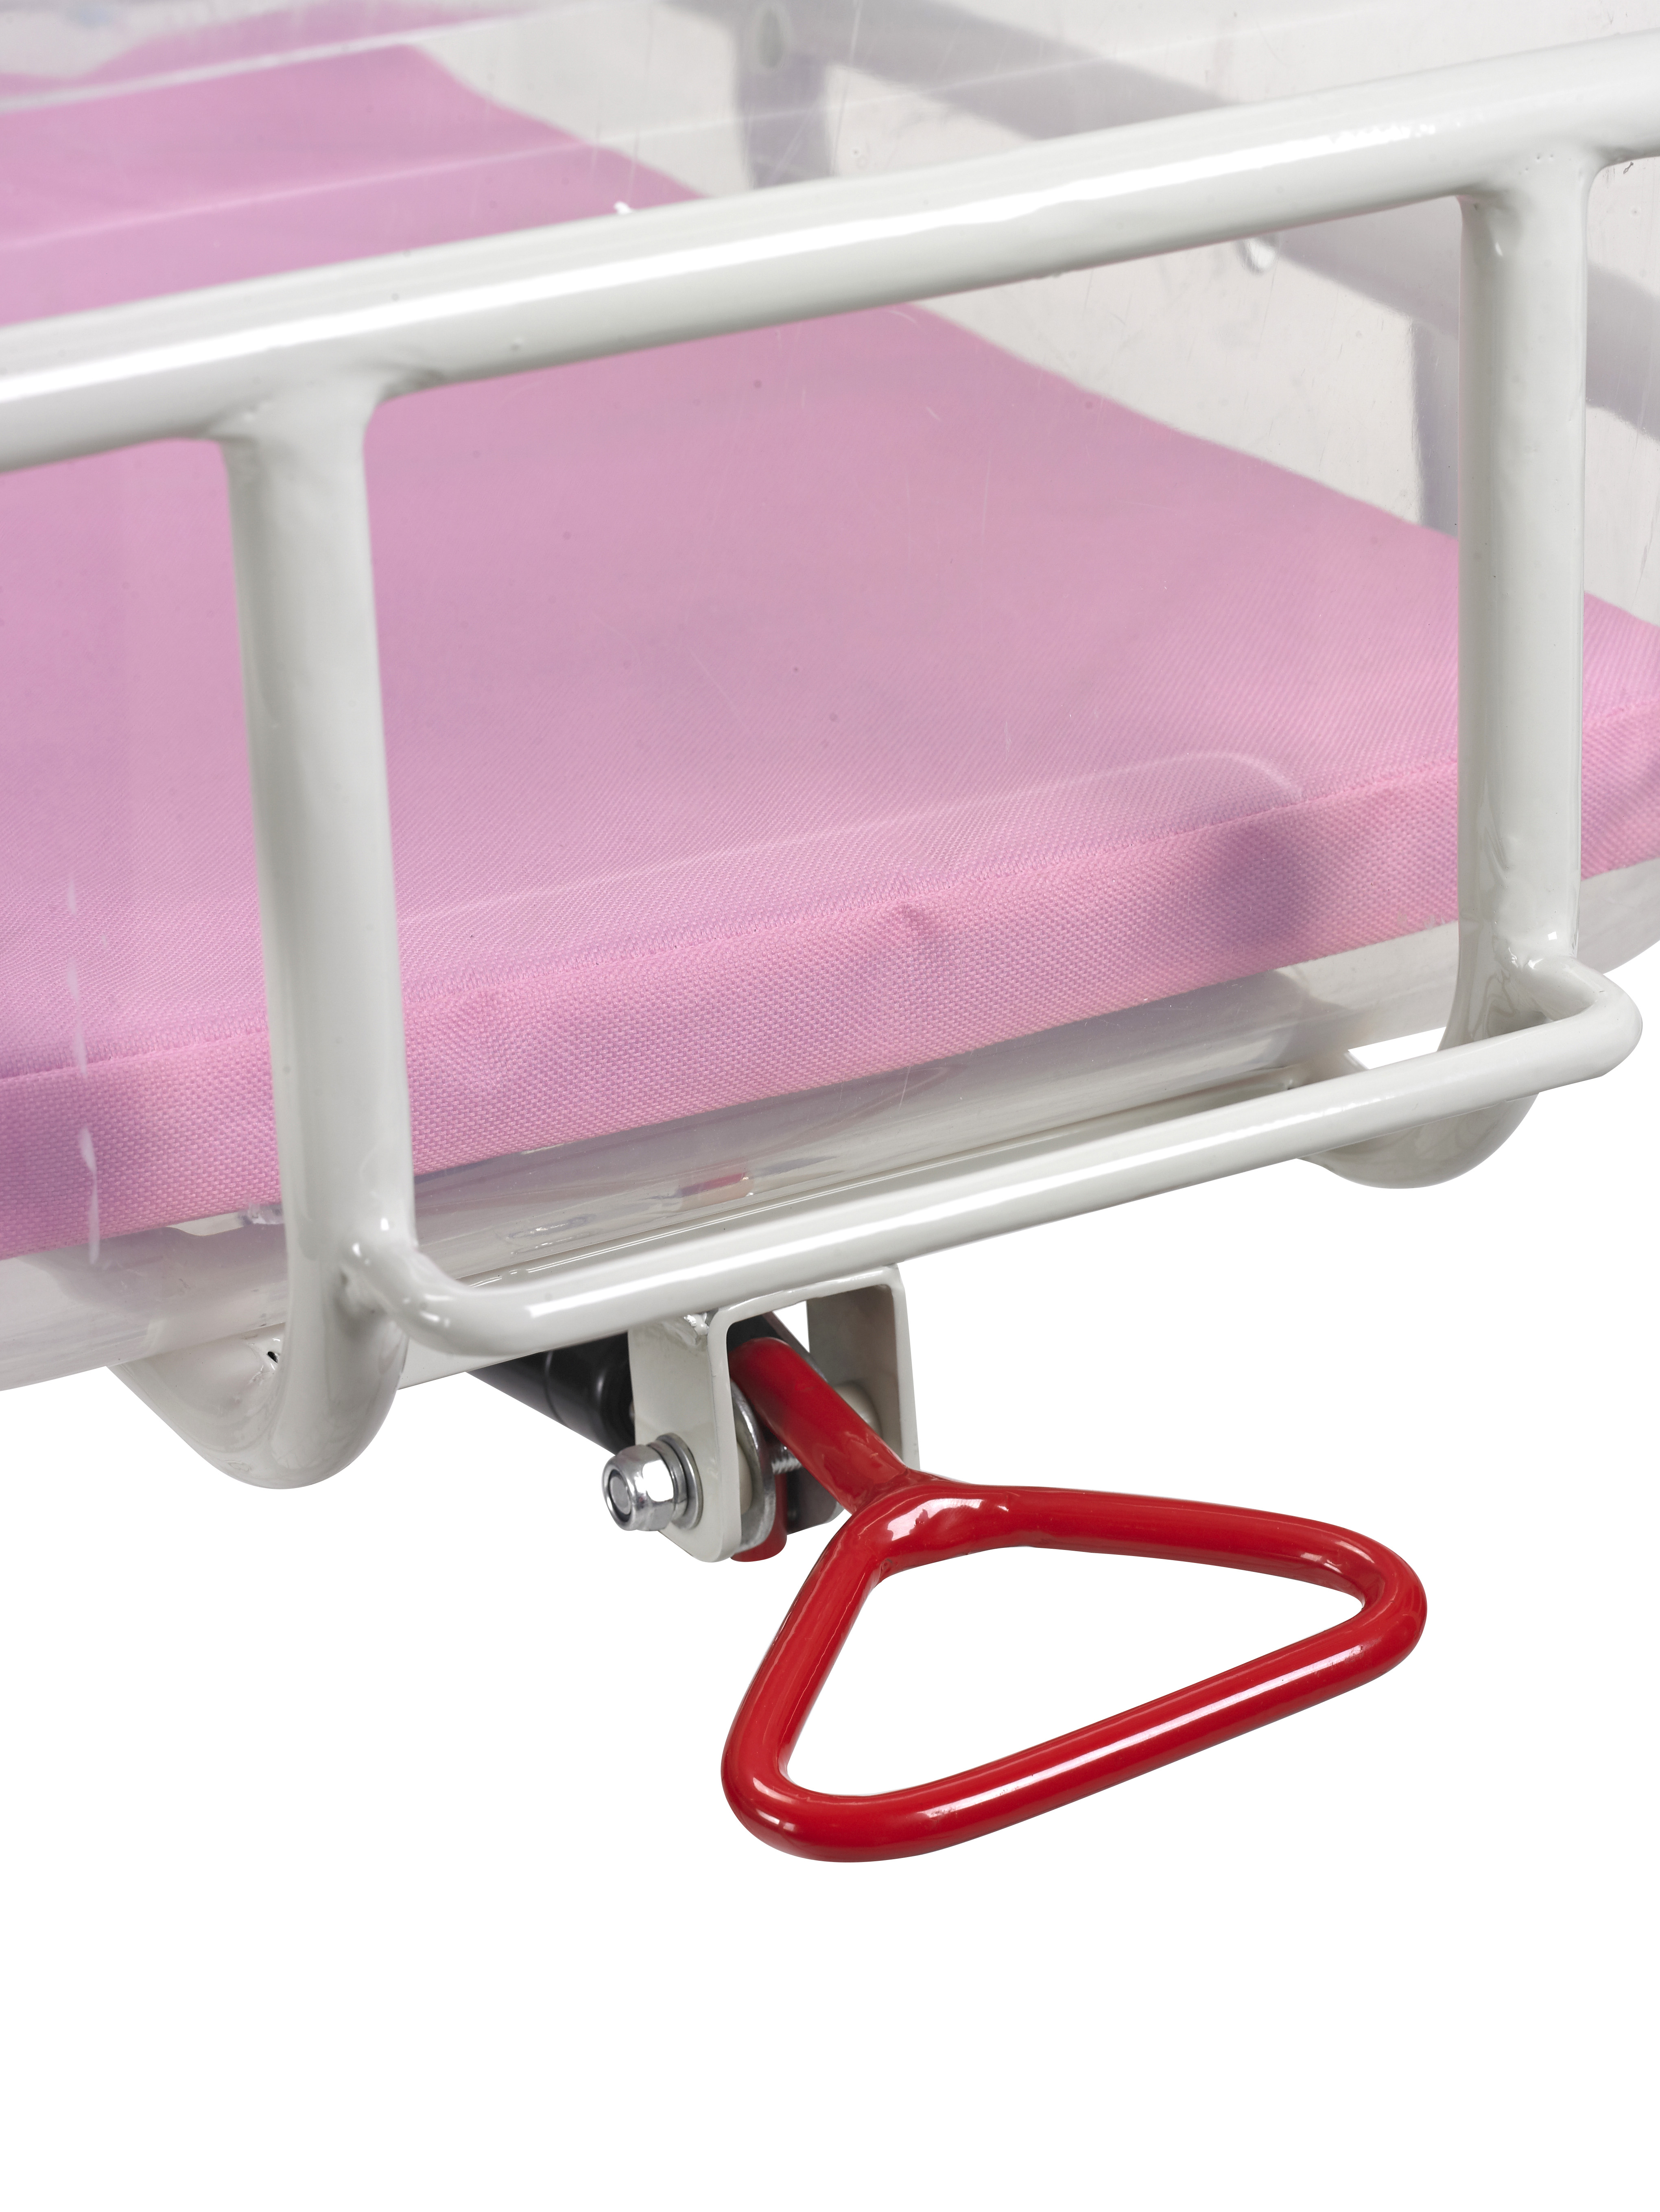 New Born Baby Cart Baby Cot Bassinet ABS Plastic Metal *900 Guangzhou with Adjustable Function 1pc/carton 20-30days 820*550